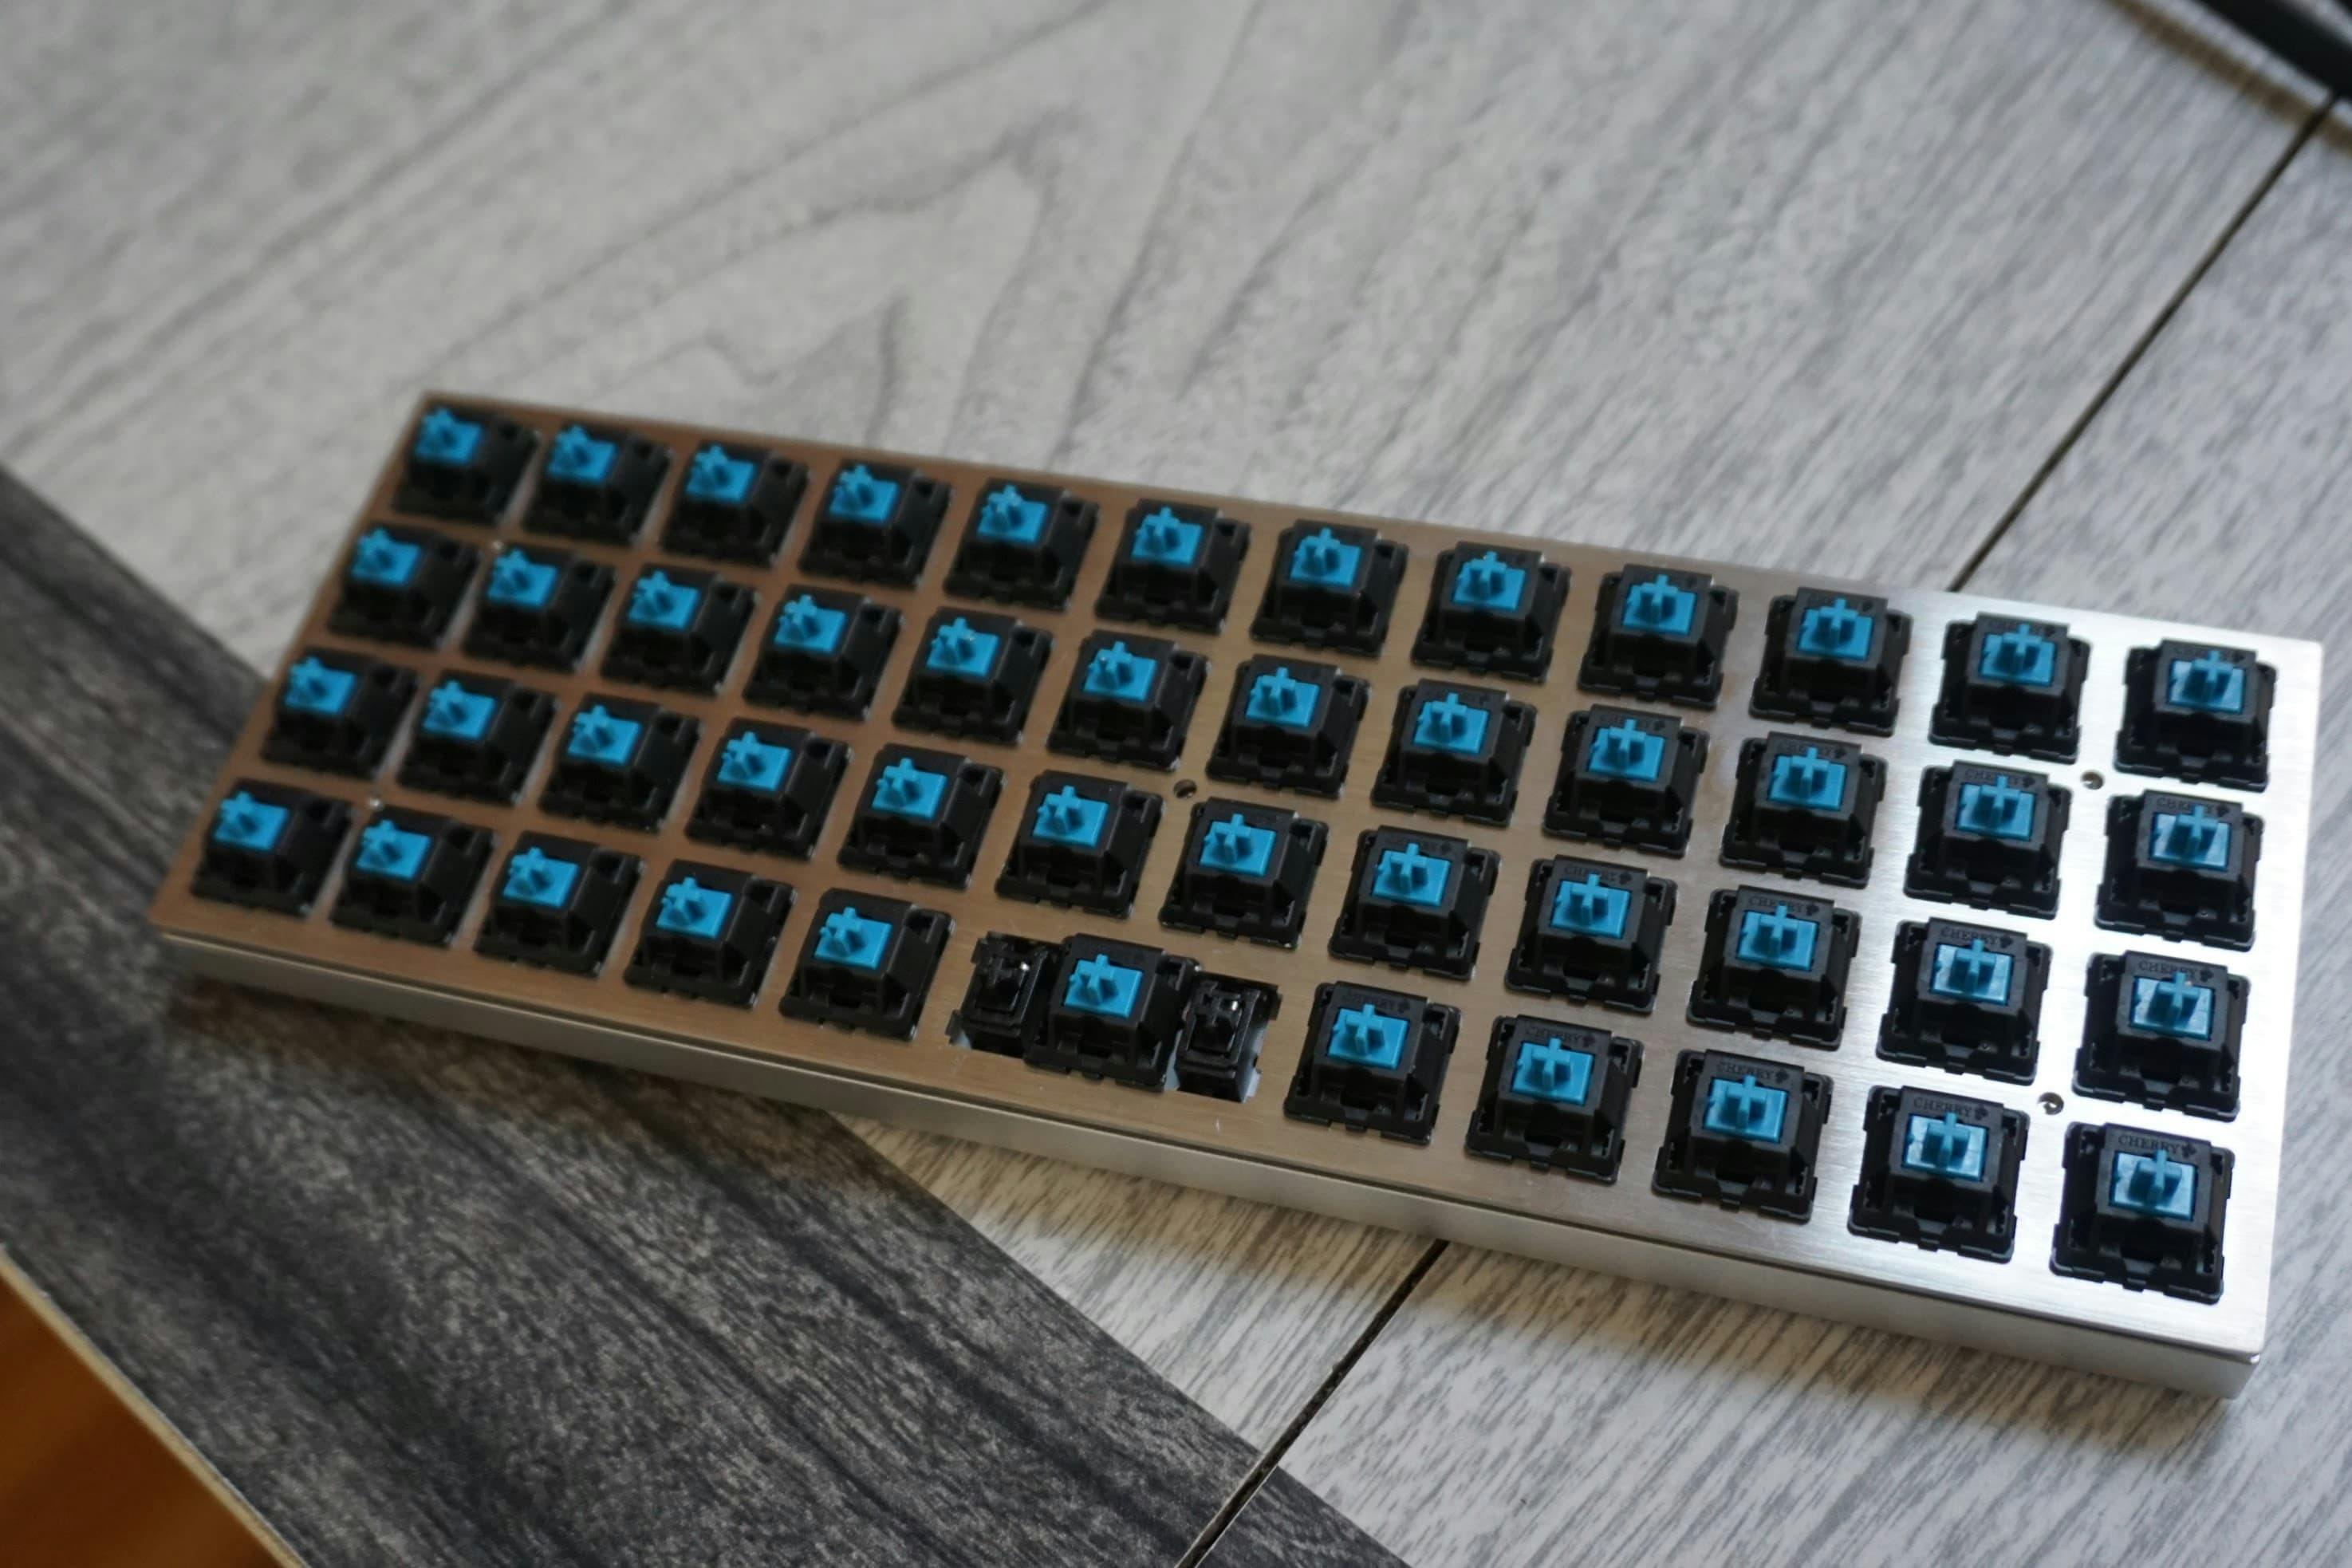 Planck keyboard, Cherry MX blue switches soldered and the top plate sitting in the case. No keycaps yet